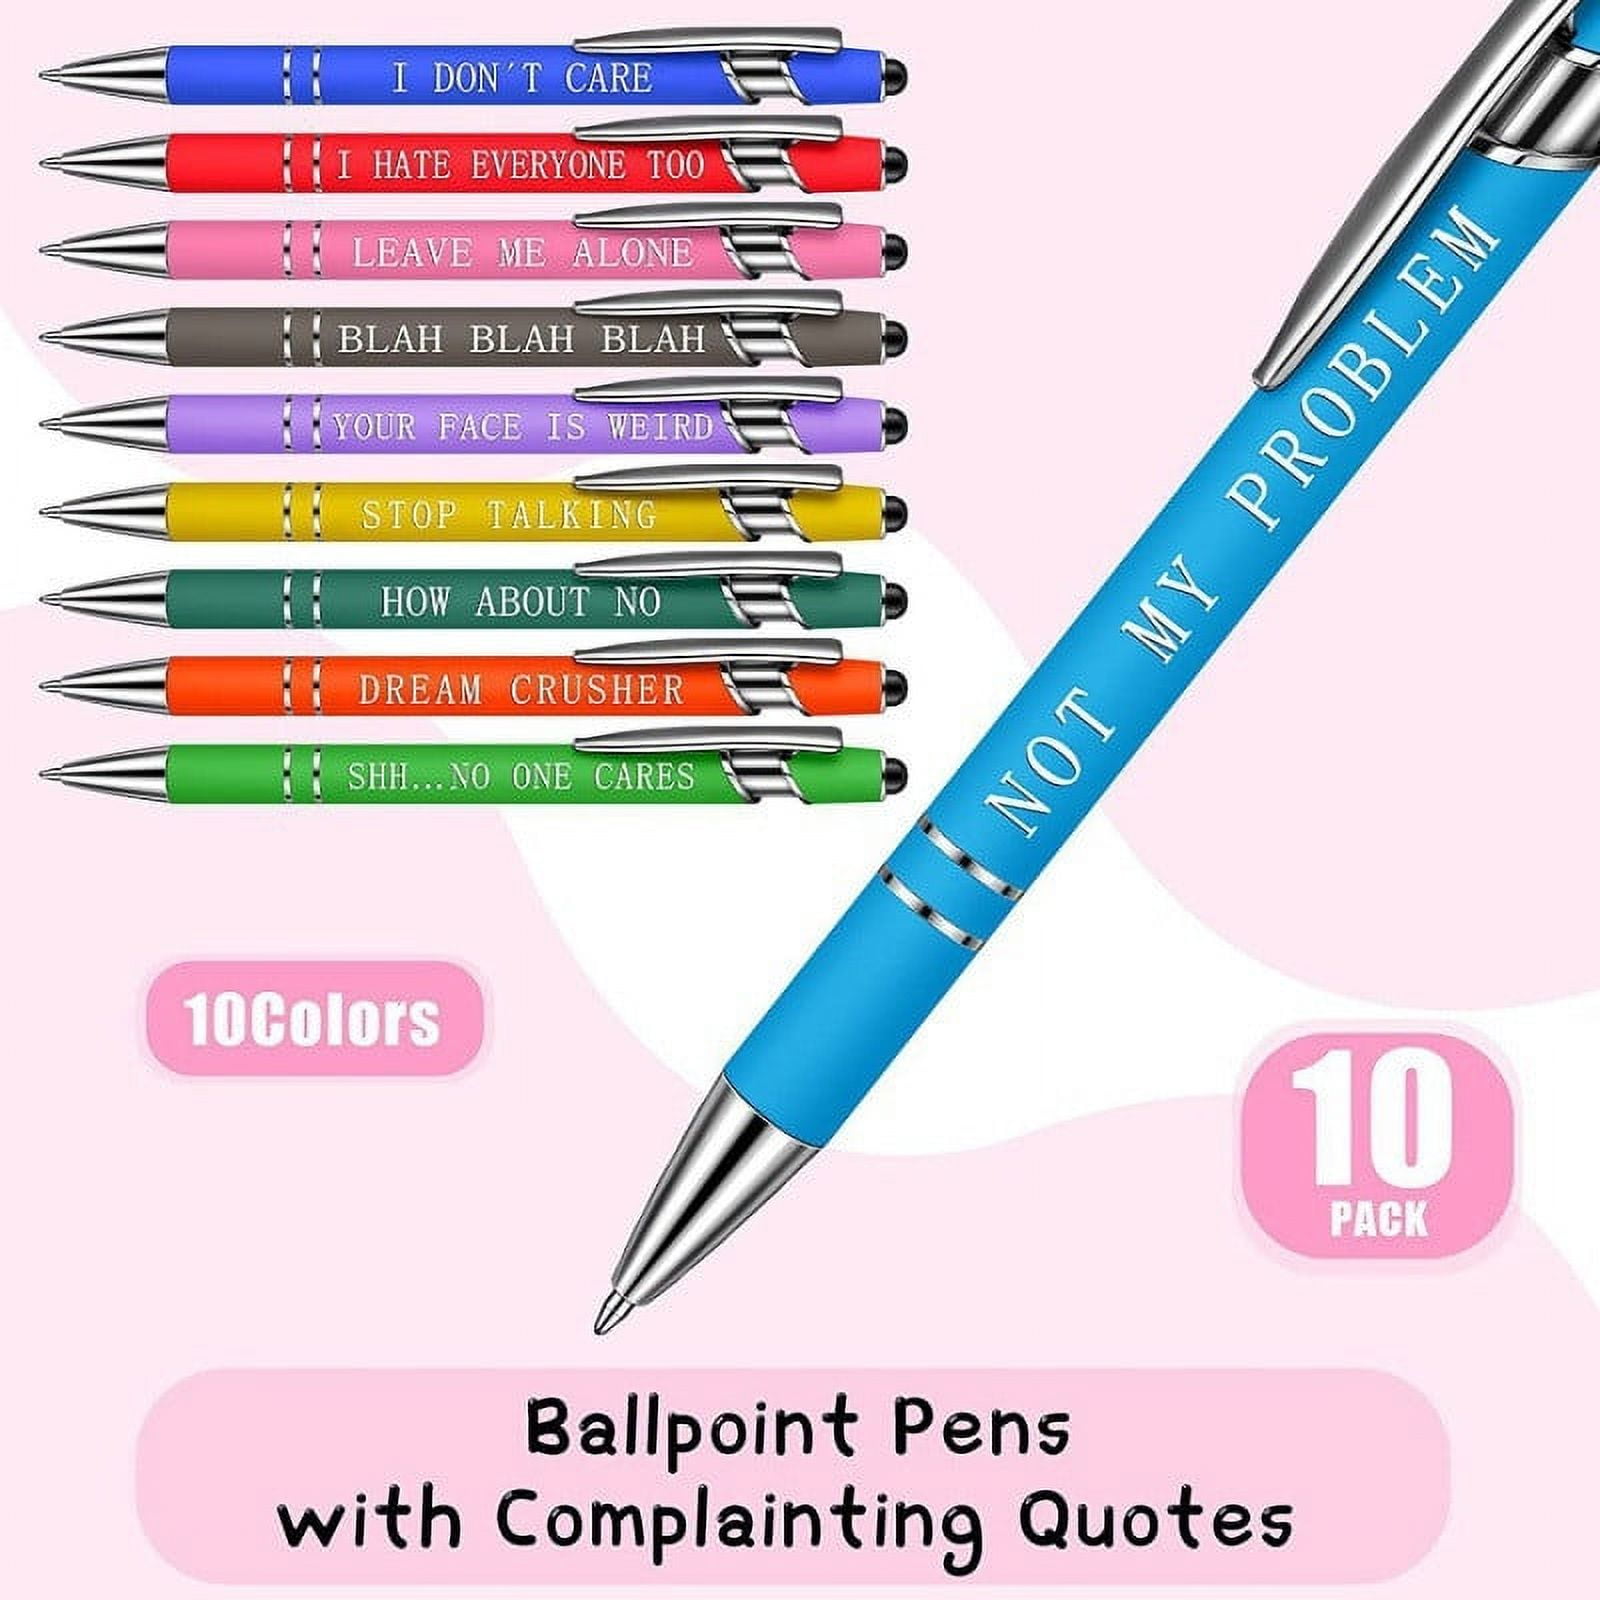 Magic Neon Puffy Pens - Set of 6 (Other)